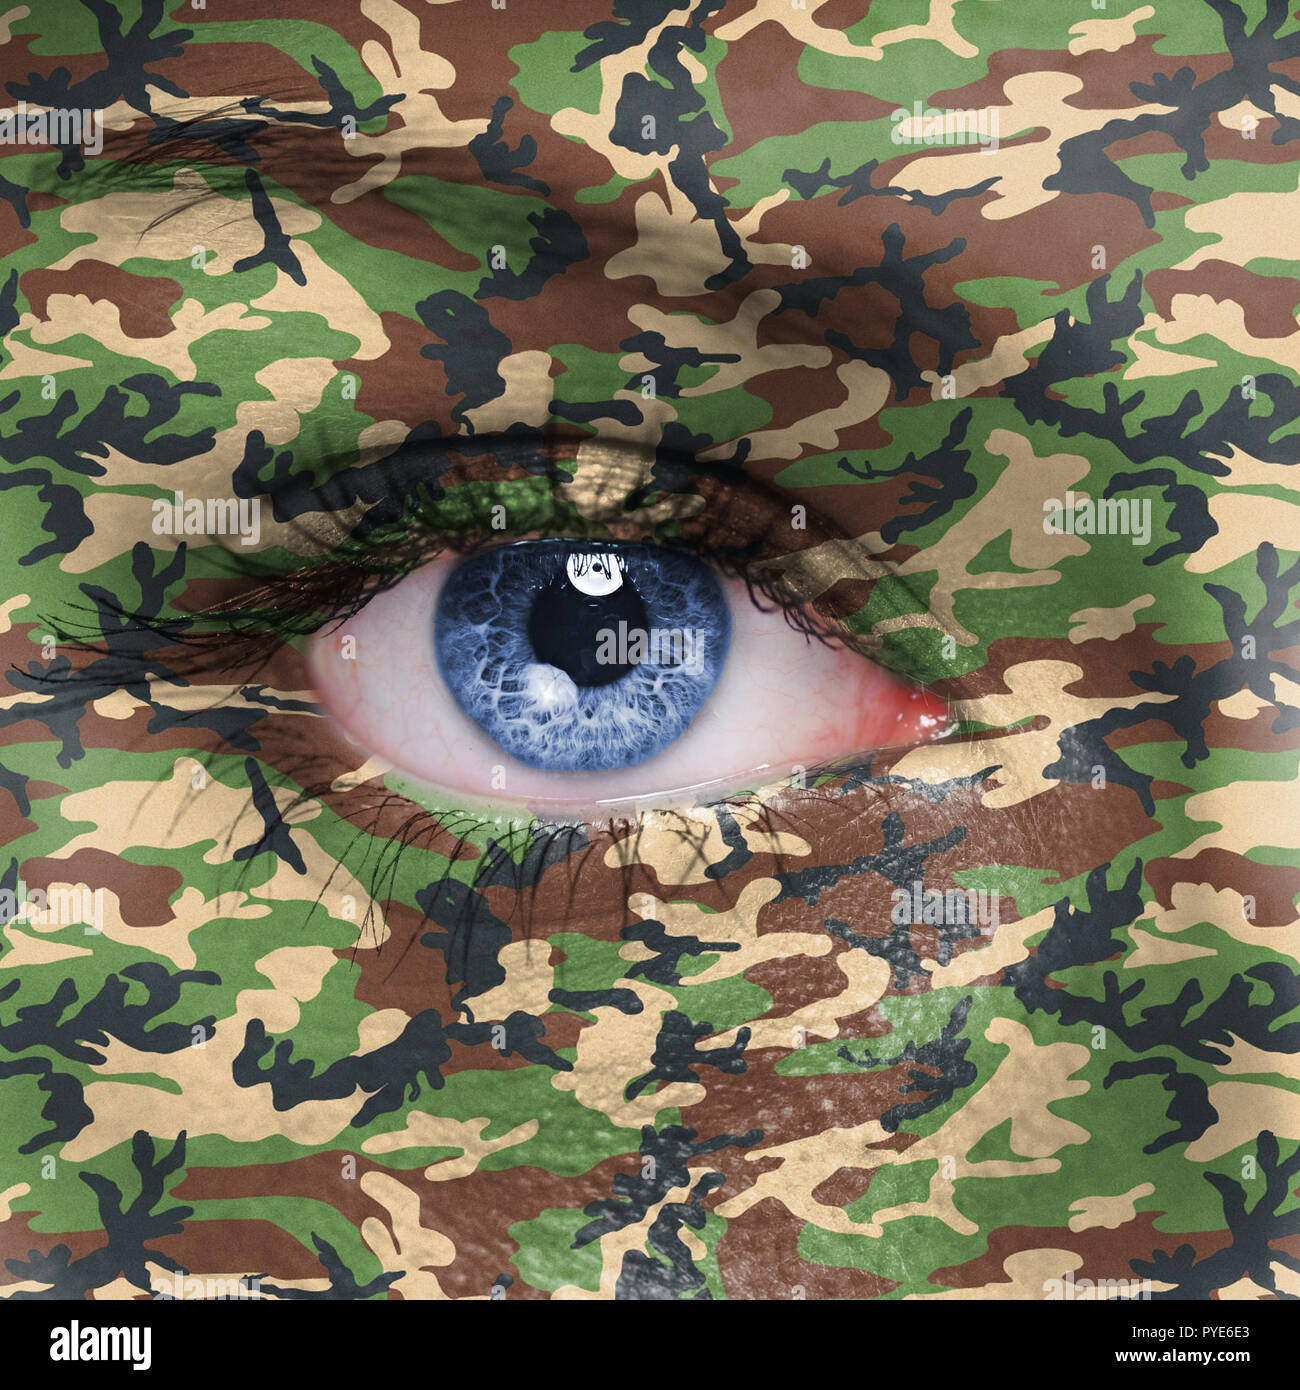 Jungle camouflage on human face Stock Photo